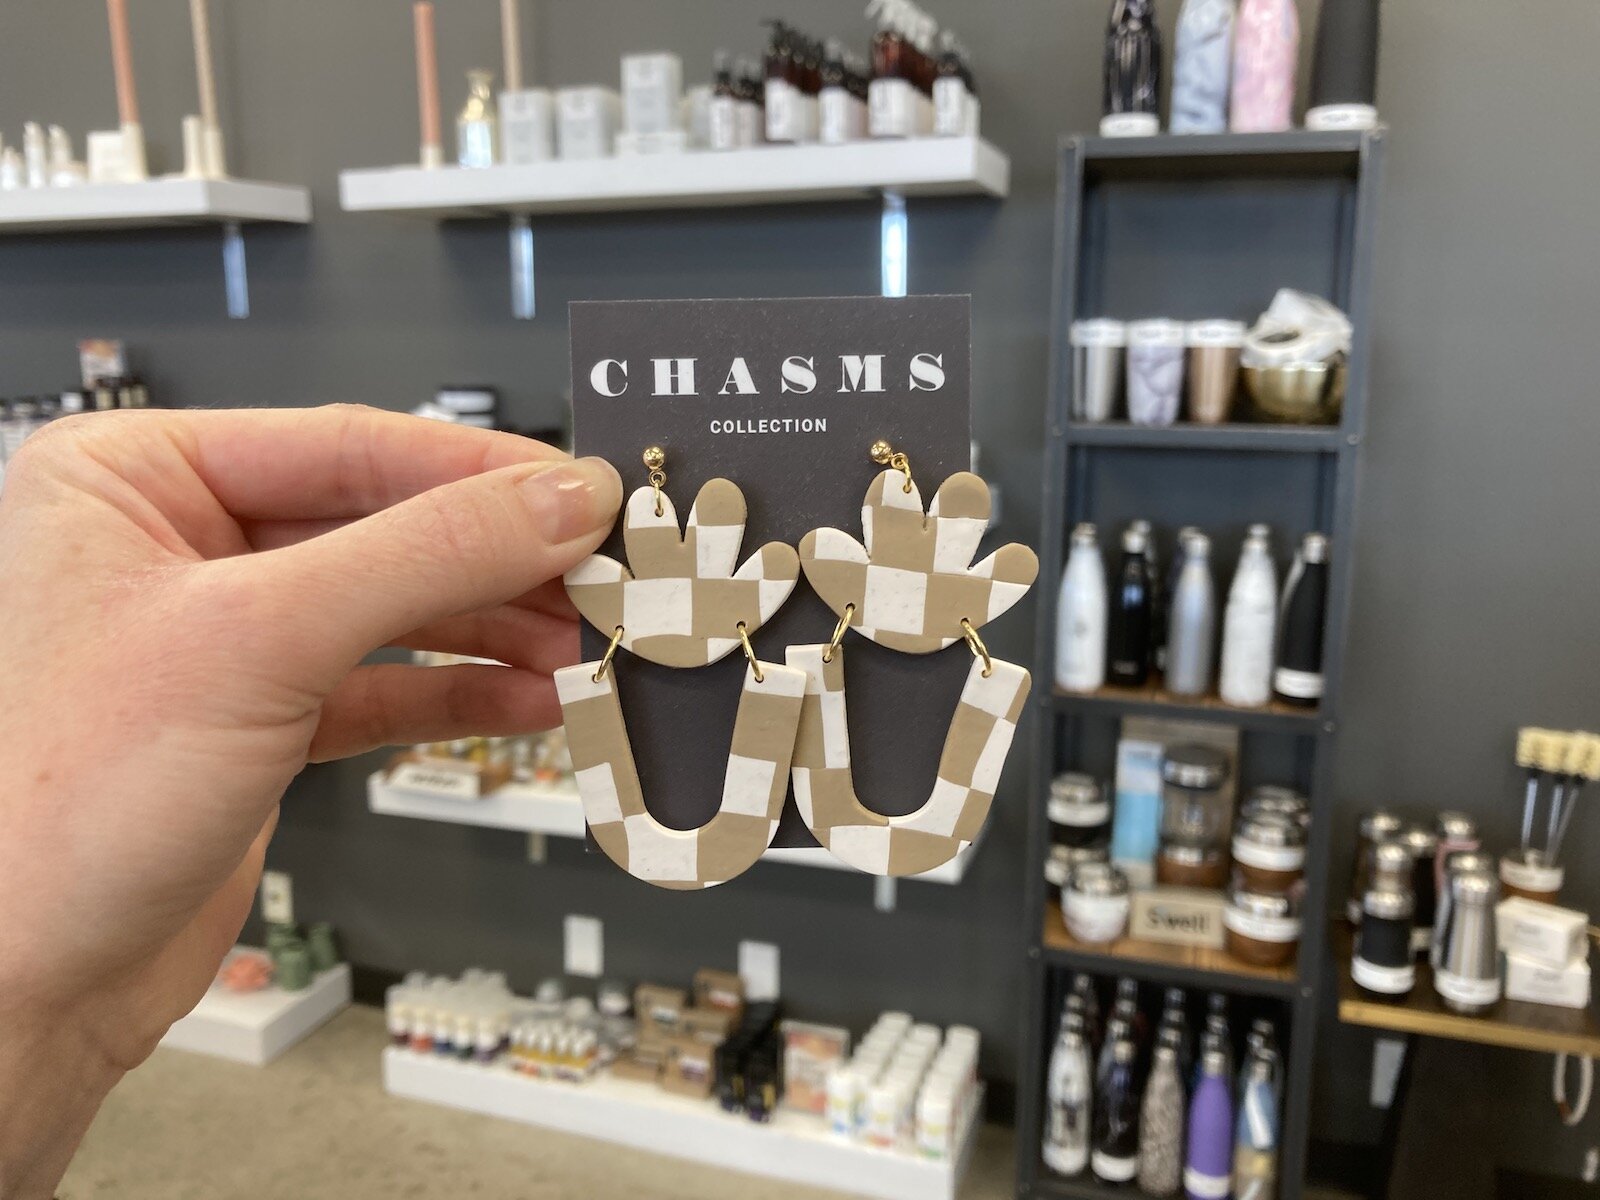 Chasms earrings are made in Fort Wayne.